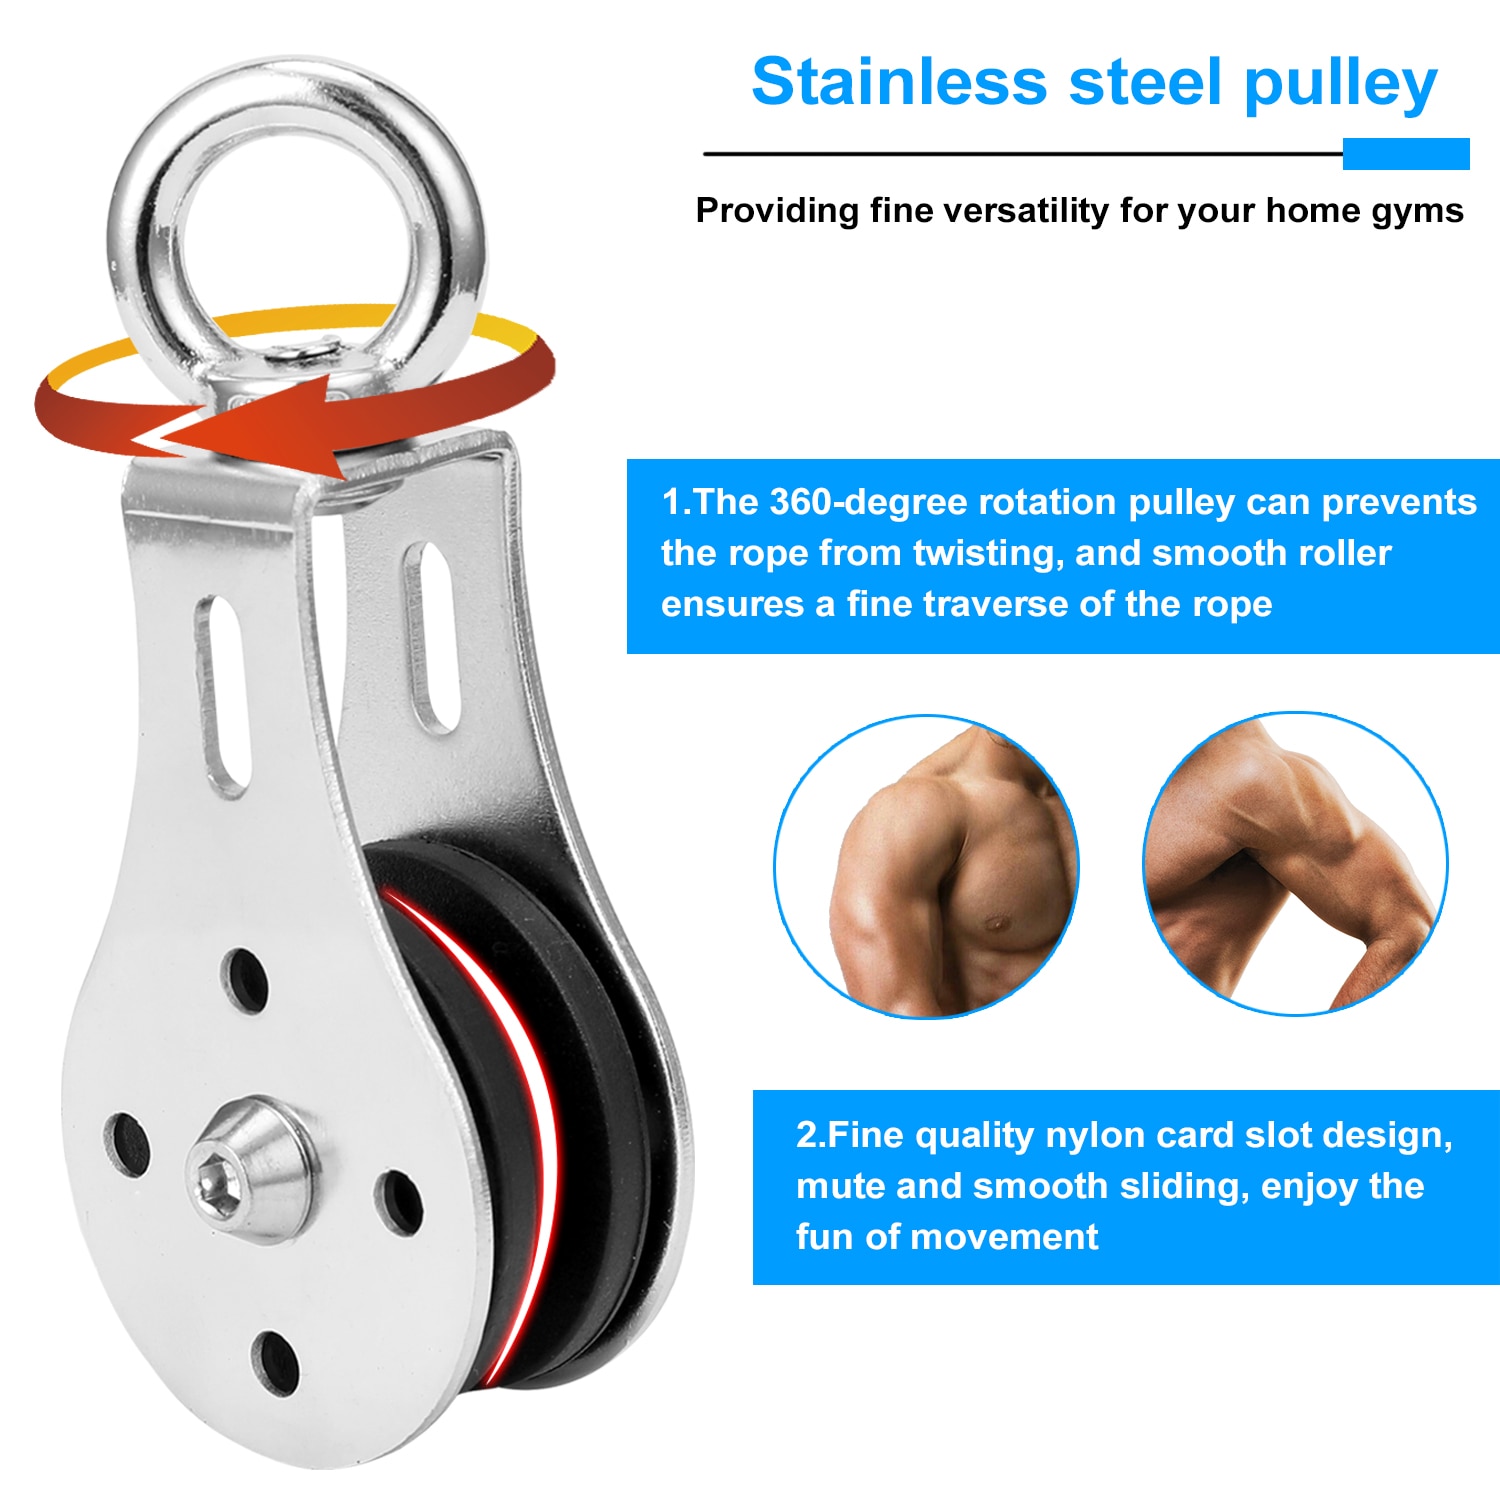 Fitness DIY Pulley Cable Machine Attachment System Loading Pin Lifting Arm Biceps Triceps Blaster Hand Strength Equipment